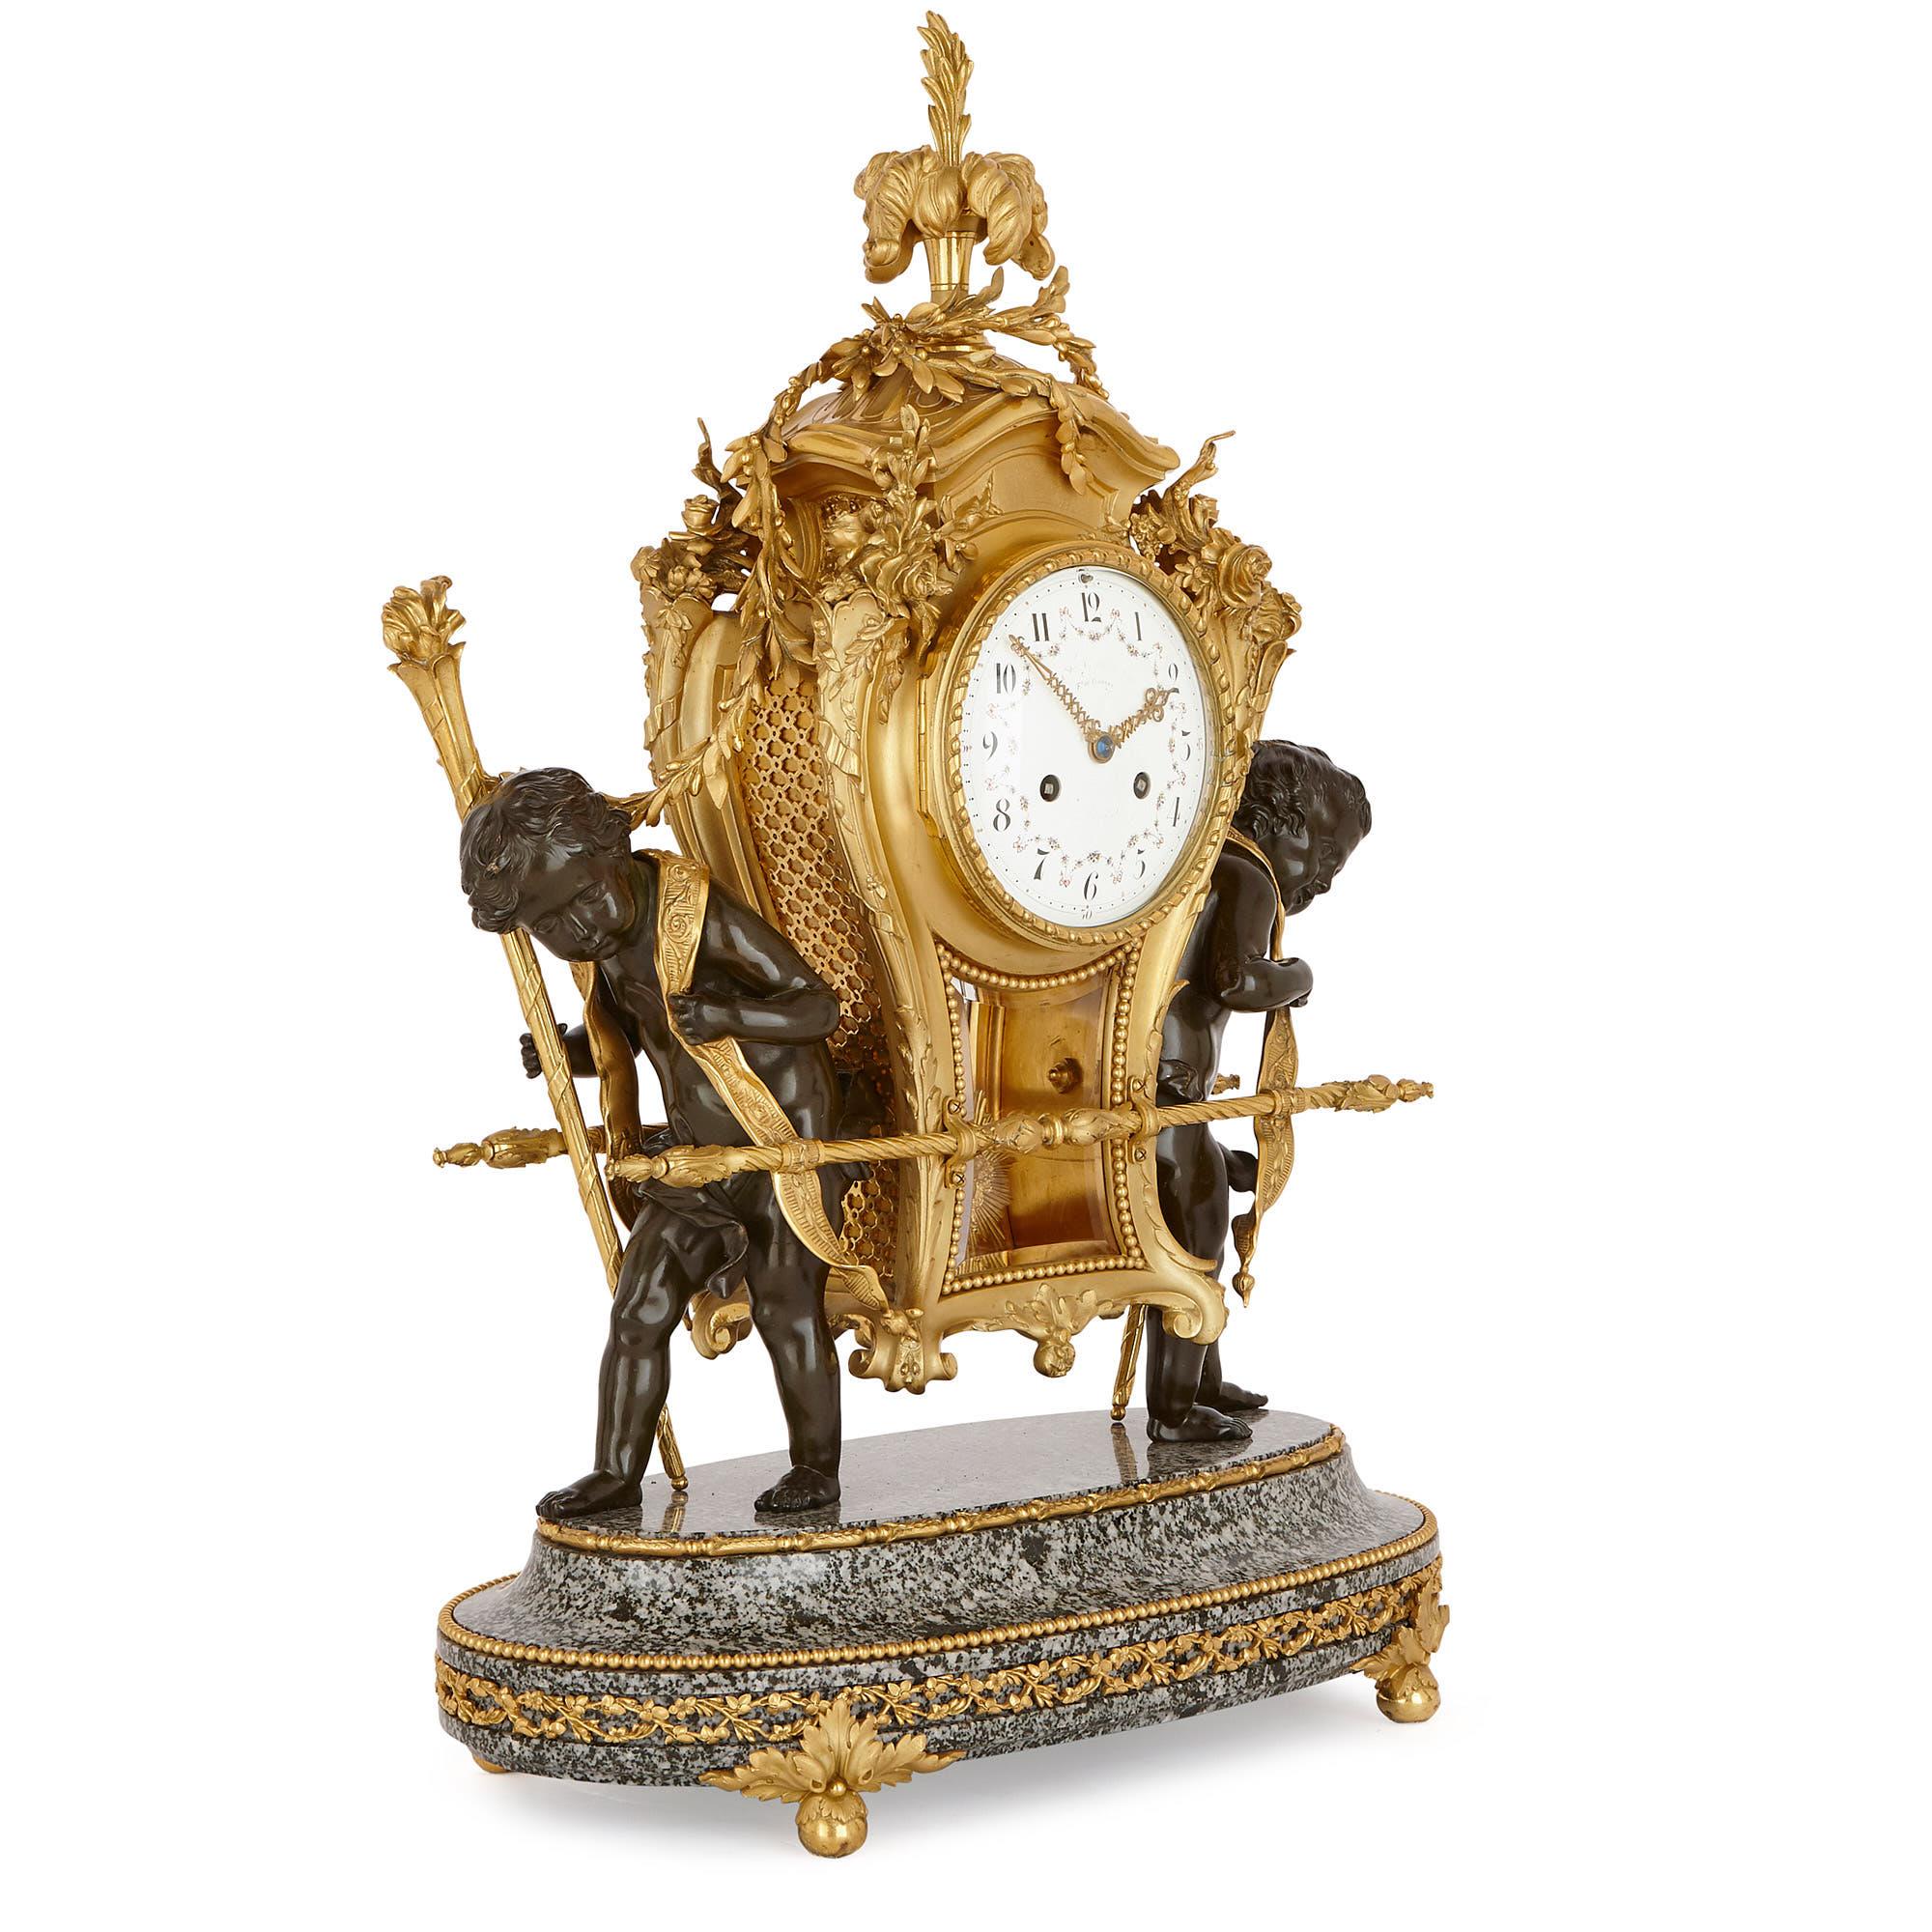 This three-piece set—composed of a clock and a pair of flanking candelabra—is a truly unique and delightful piece of decorative art. 

The clock is modelled in the image of an 18th century sedan chair – that is, a covered chair sat in by a member